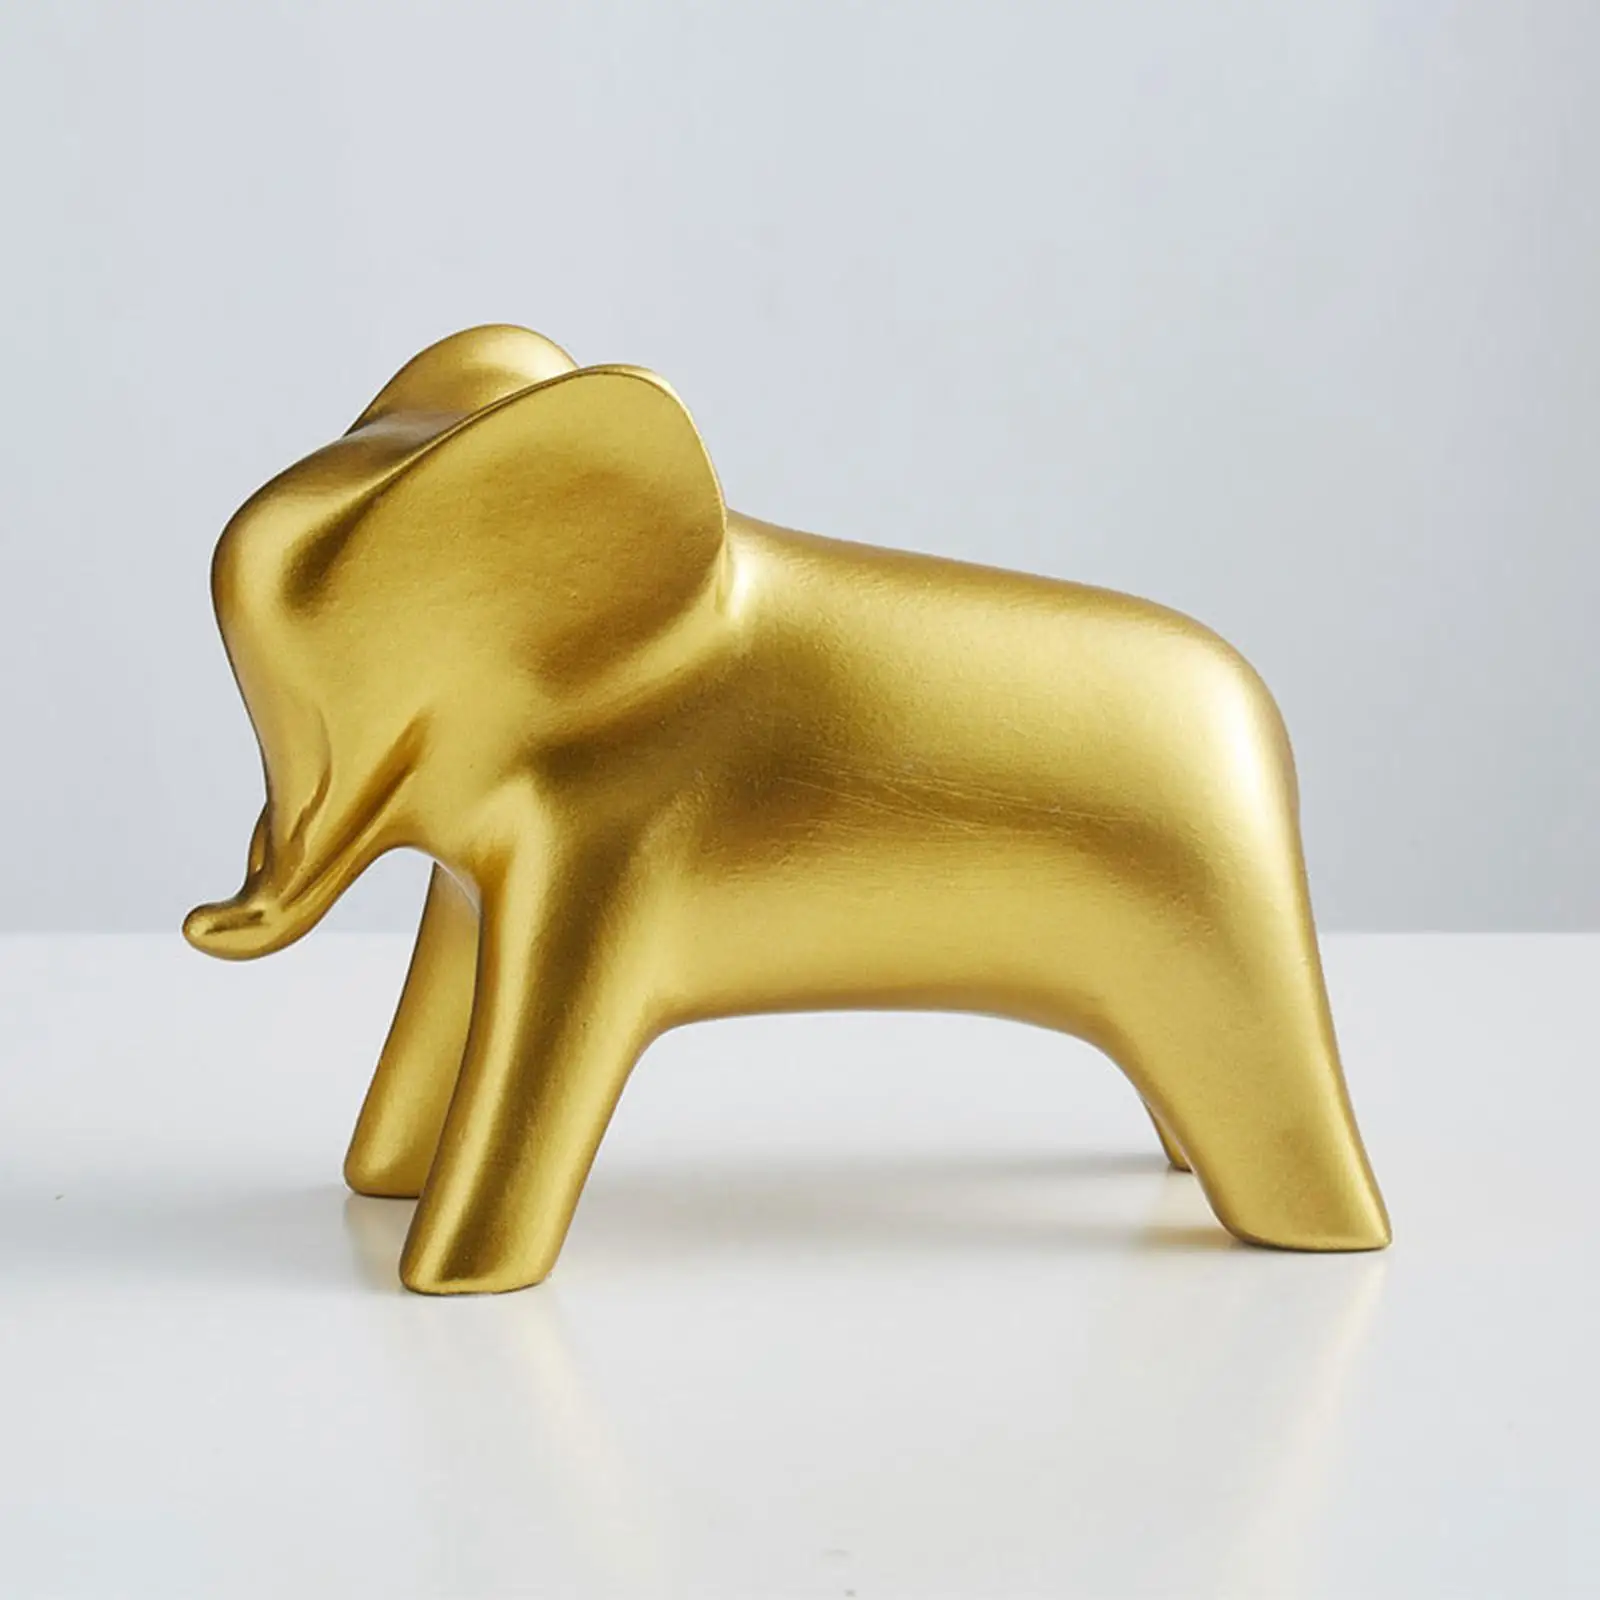 Resin Small Animal Statues Home Decor Modern Gold Figurines Sculpture for Office Cabinets Decor Display Ornaments Gifts